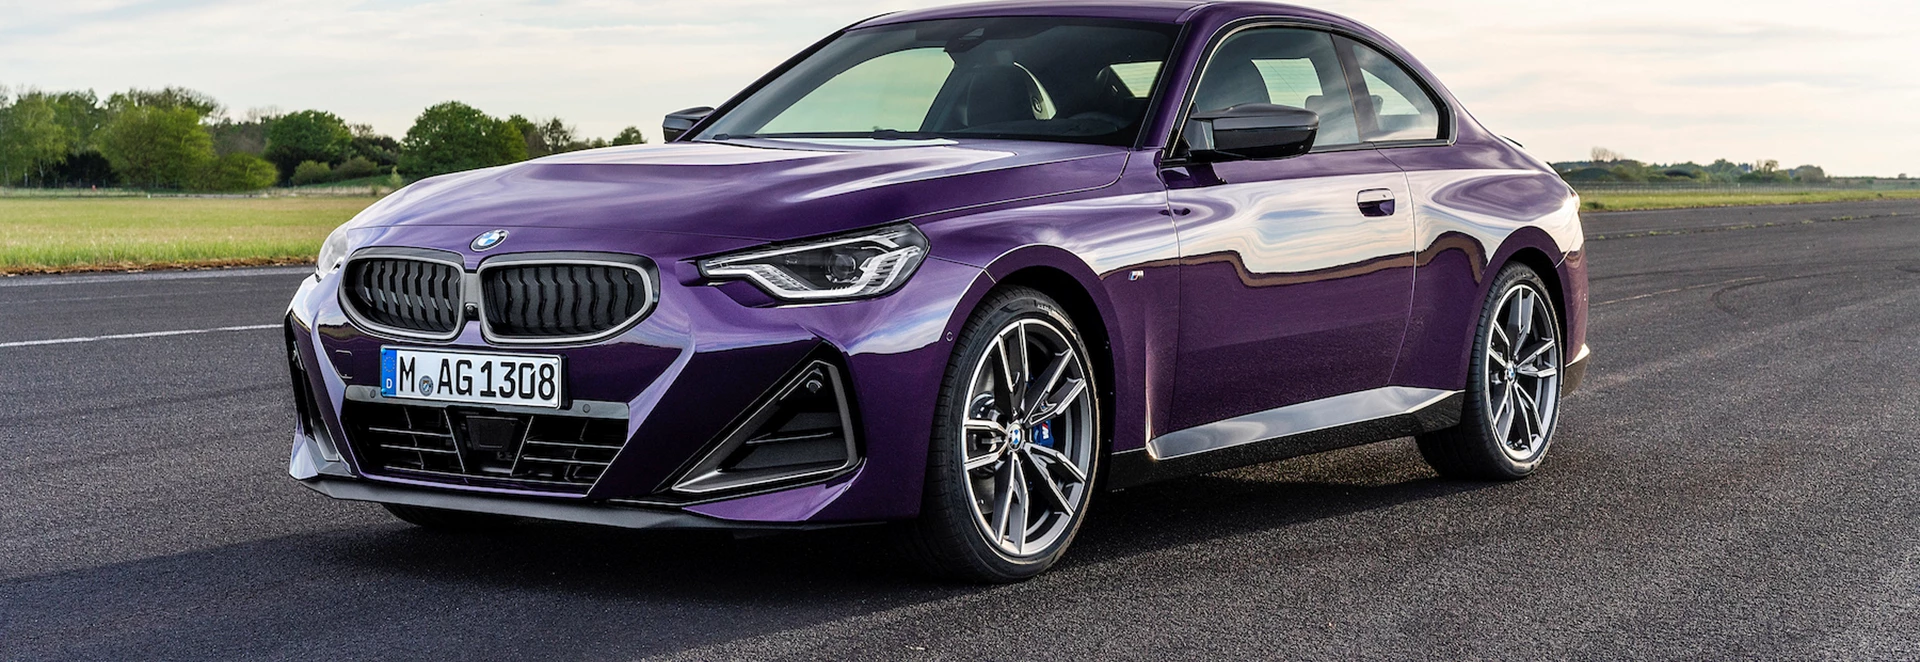 New BMW 2 Series Coupe revealed with bold design and latest technology 